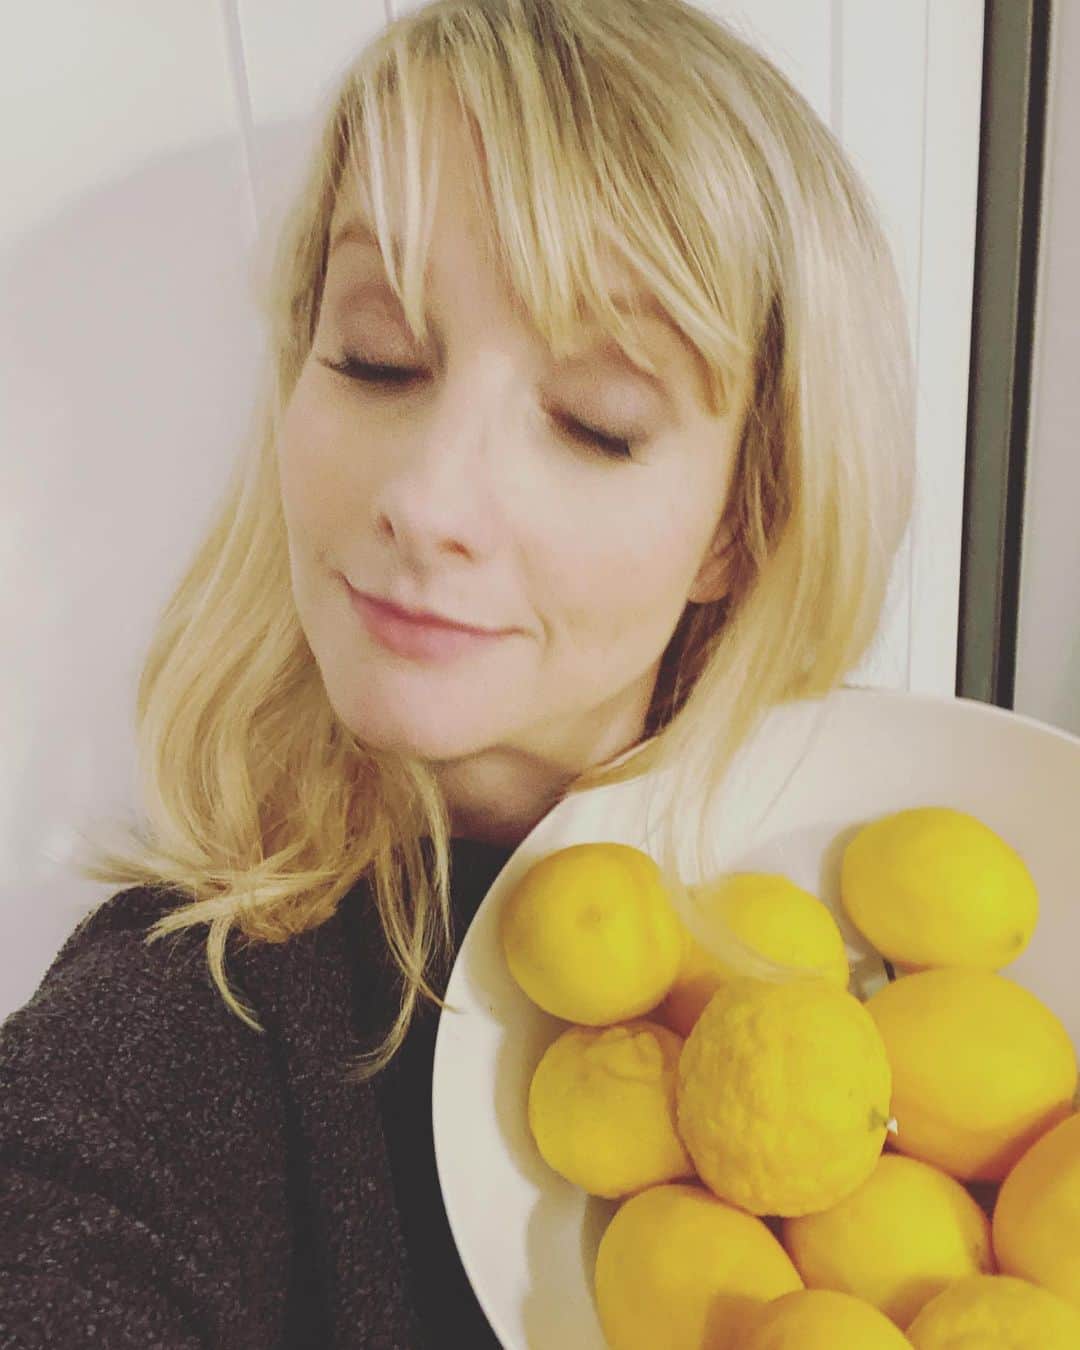 メリッサ・ラウシュのインスタグラム：「I told myself I wasn't going to waste time taking multiple pics when taking a selfie for IG, so here you go....my first and only pic. Nailed it. Had a bunch of lemons from a tree in my yard so decided to make some LEMON COOKIES!  Here's the recipe (they happen to be #GlutenFree and #Vegan (unless you decide to top them with spaghetti and meatballs in which case they would be #neither...your call)! Ingredients: 2 cups almond flour  1 cup oat flour  1/4 cup coconut sugar 1 tsp baking powder pinch of salt (if you have a big pincher take it easy) Zest of two lemons 1/4 cup fresh lemon juice (May I recommend you use the juice from the lemons you zested so that you're not wasting lemons. Plus, I find the lemons look sad and angry after they've been zested, so I feel like juicing them afterward gives them a sense of purpose and makes them calm down) 1 tablespoon vanilla extract  2 tablespoons maple syrup 1 tablespoon coconut oil (melted) Mix dry ingredients, then when they get sick of each other and want to liven things up, add the wet ingredients. They'll welcome the change of texture. Am I aware that I keep anthropomorphizing food? Yes, and get off my junk before I send a zested lemon to teach you a lesson. Mix it all together until it forms a big ball of sticky dough. Put in the fridge for about an hour. Not going to tell you what to do with that hour other than preheat the oven at some point to 350 and spend some time thinking about how you judged me a couple sentences back. After an hour, use a cookie scoop or a tablespoon and place dough on a baking sheet. Bake for about 10-15-ish minutes. You're going to have to do you here because I forgot to time it exactly. Take them out and enjoy. Unless you don't enjoy lemon, in which case you will absolutely hate themm! *I realize I have an extra "m" in "them" - but I also told myself I won't waste time fixing typos, so it's staying as is.」